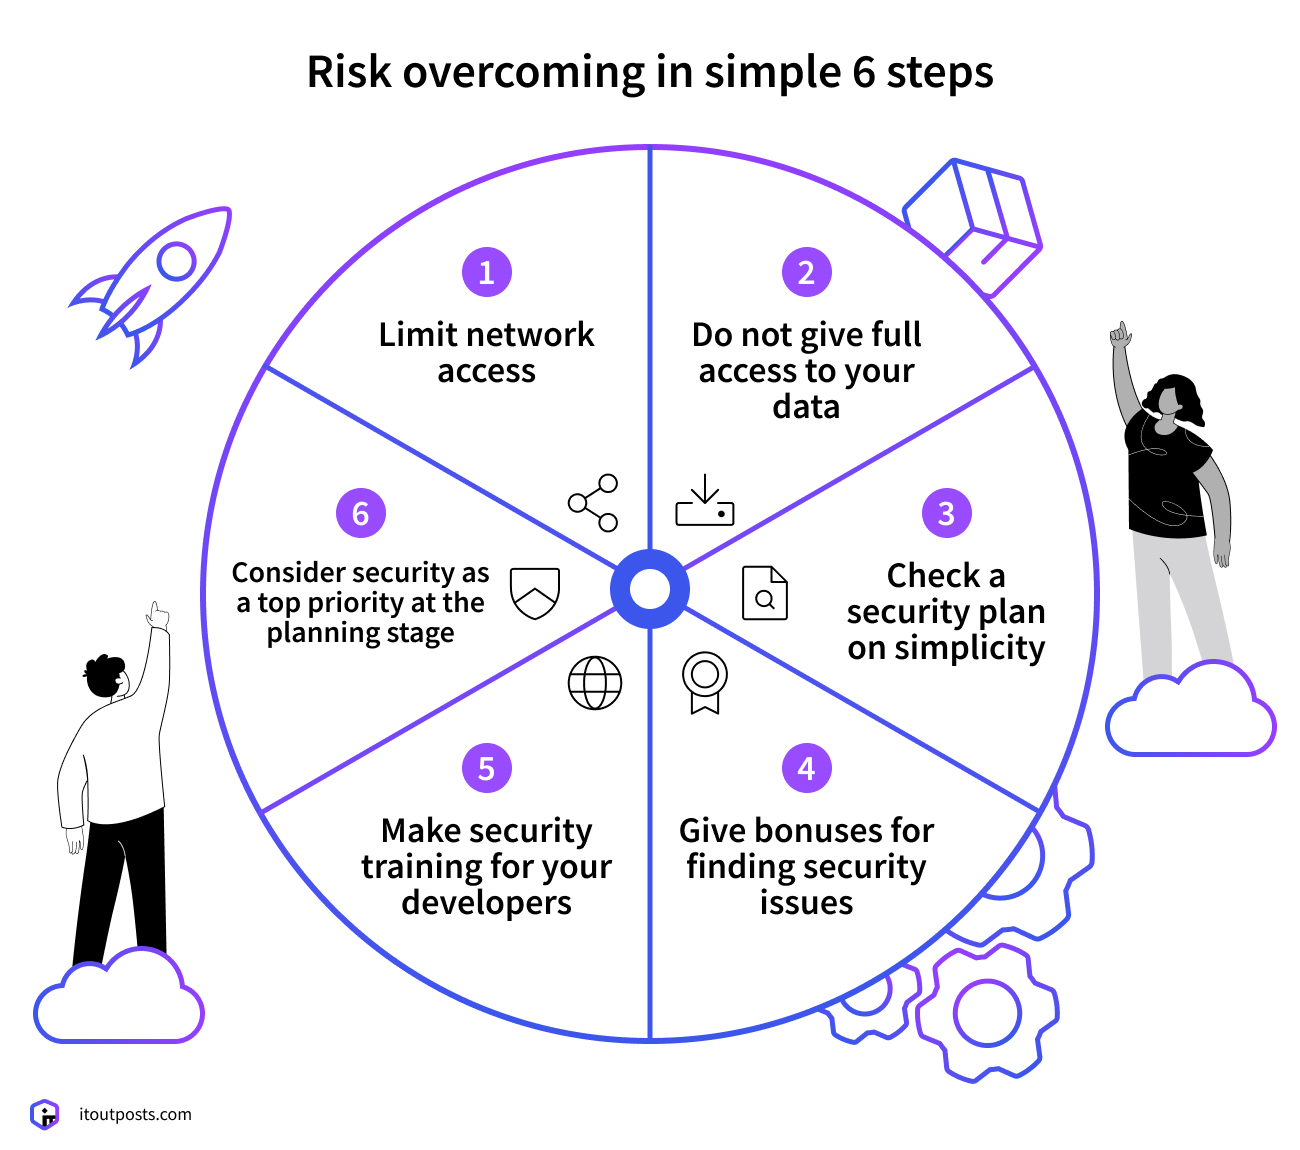 What are the main DevOps security risks and how to deal with them?